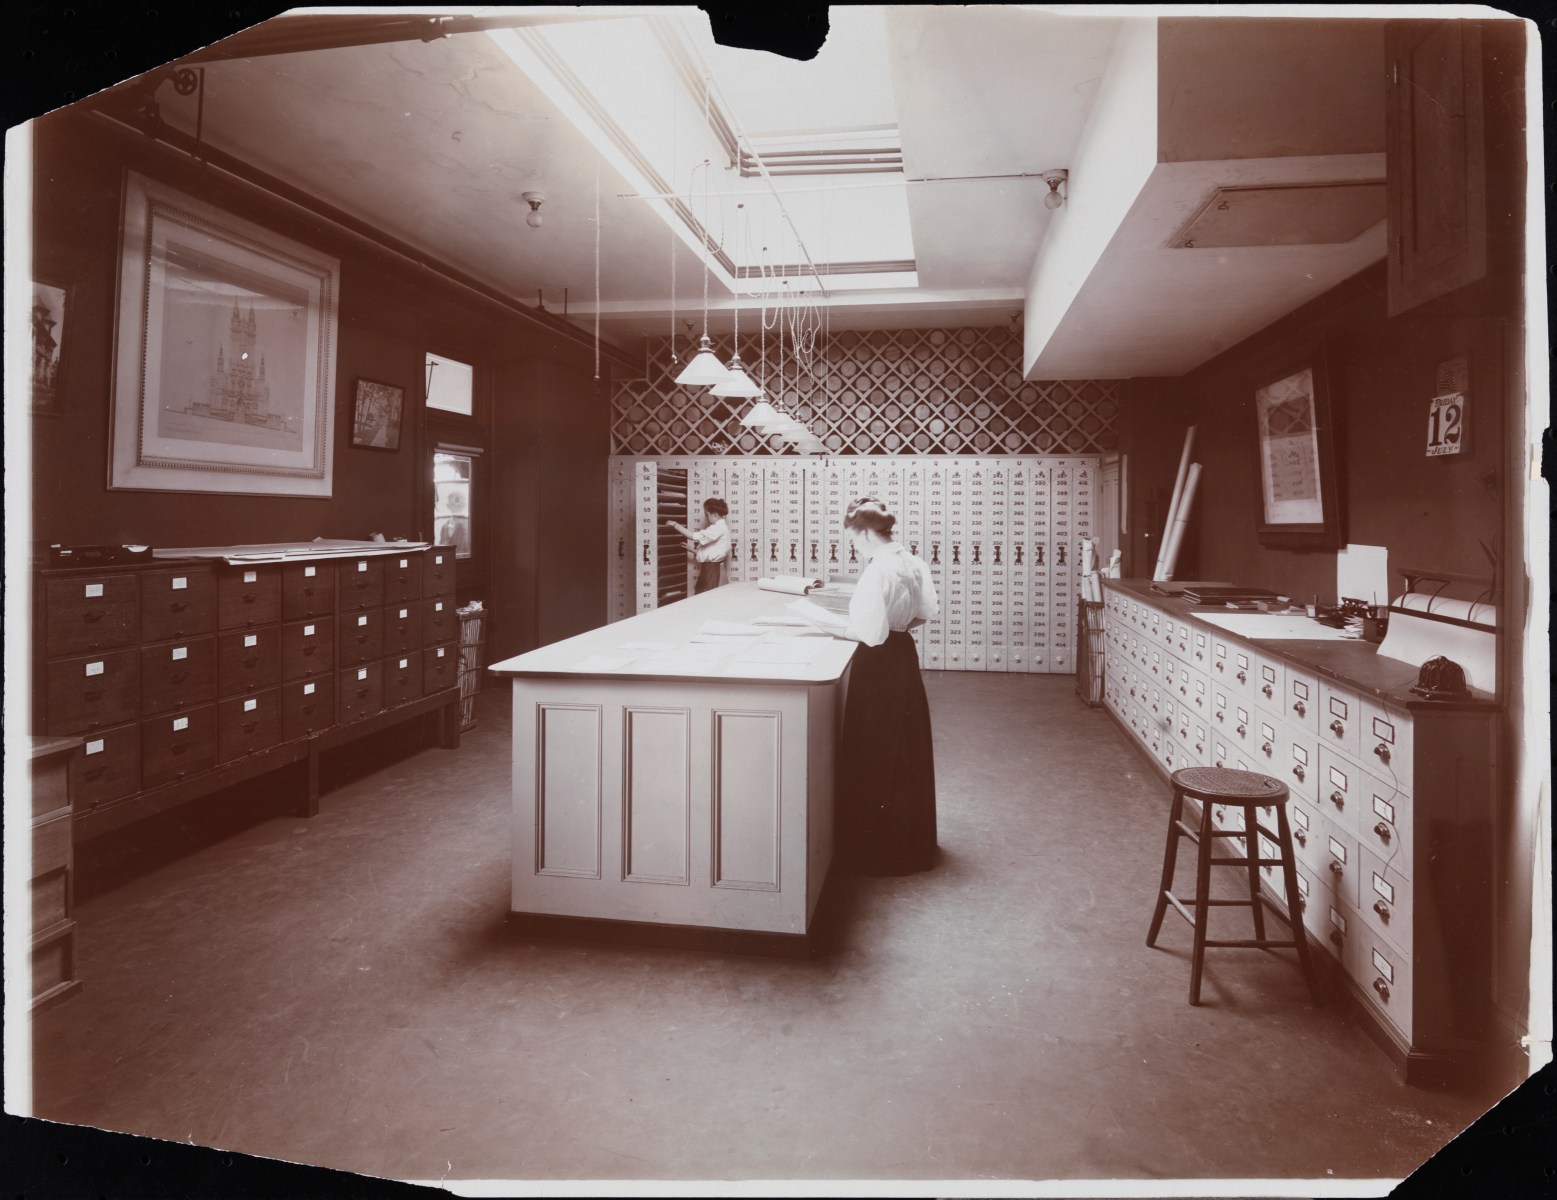 This picture shows the professionalization and scaling up of architecture firms. If you look closely, this is a highly organized room filled with filing systems containing drawings and blueprints around the perimeter. That was high-tech at the time. File drawers and filing systems were really the key tools of the trade then.